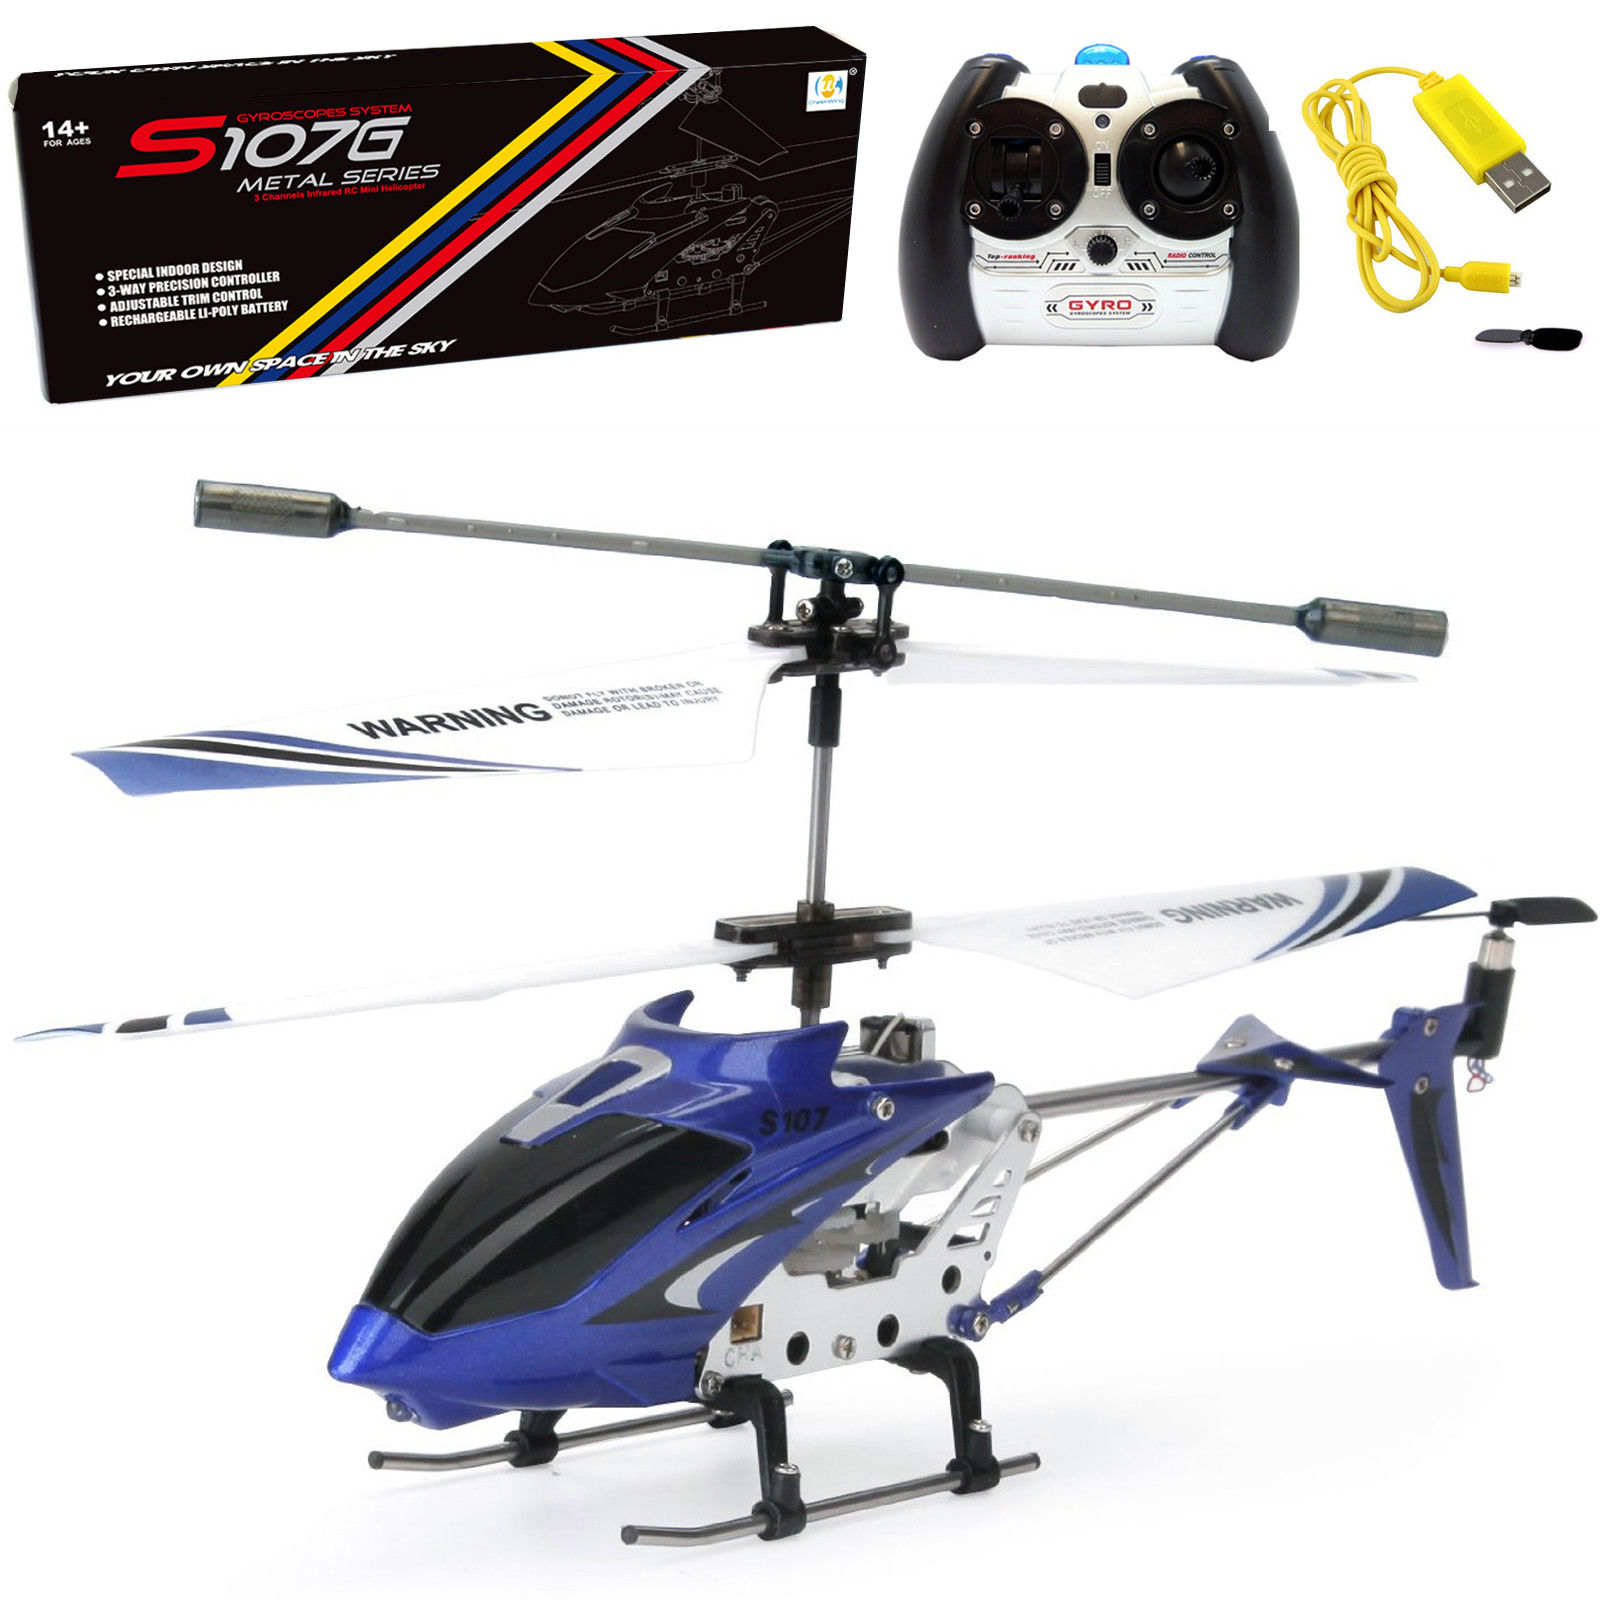 Cheerwing S107G Mini Remote Control RC Helicopter 3.5ch Alloy Copter ...